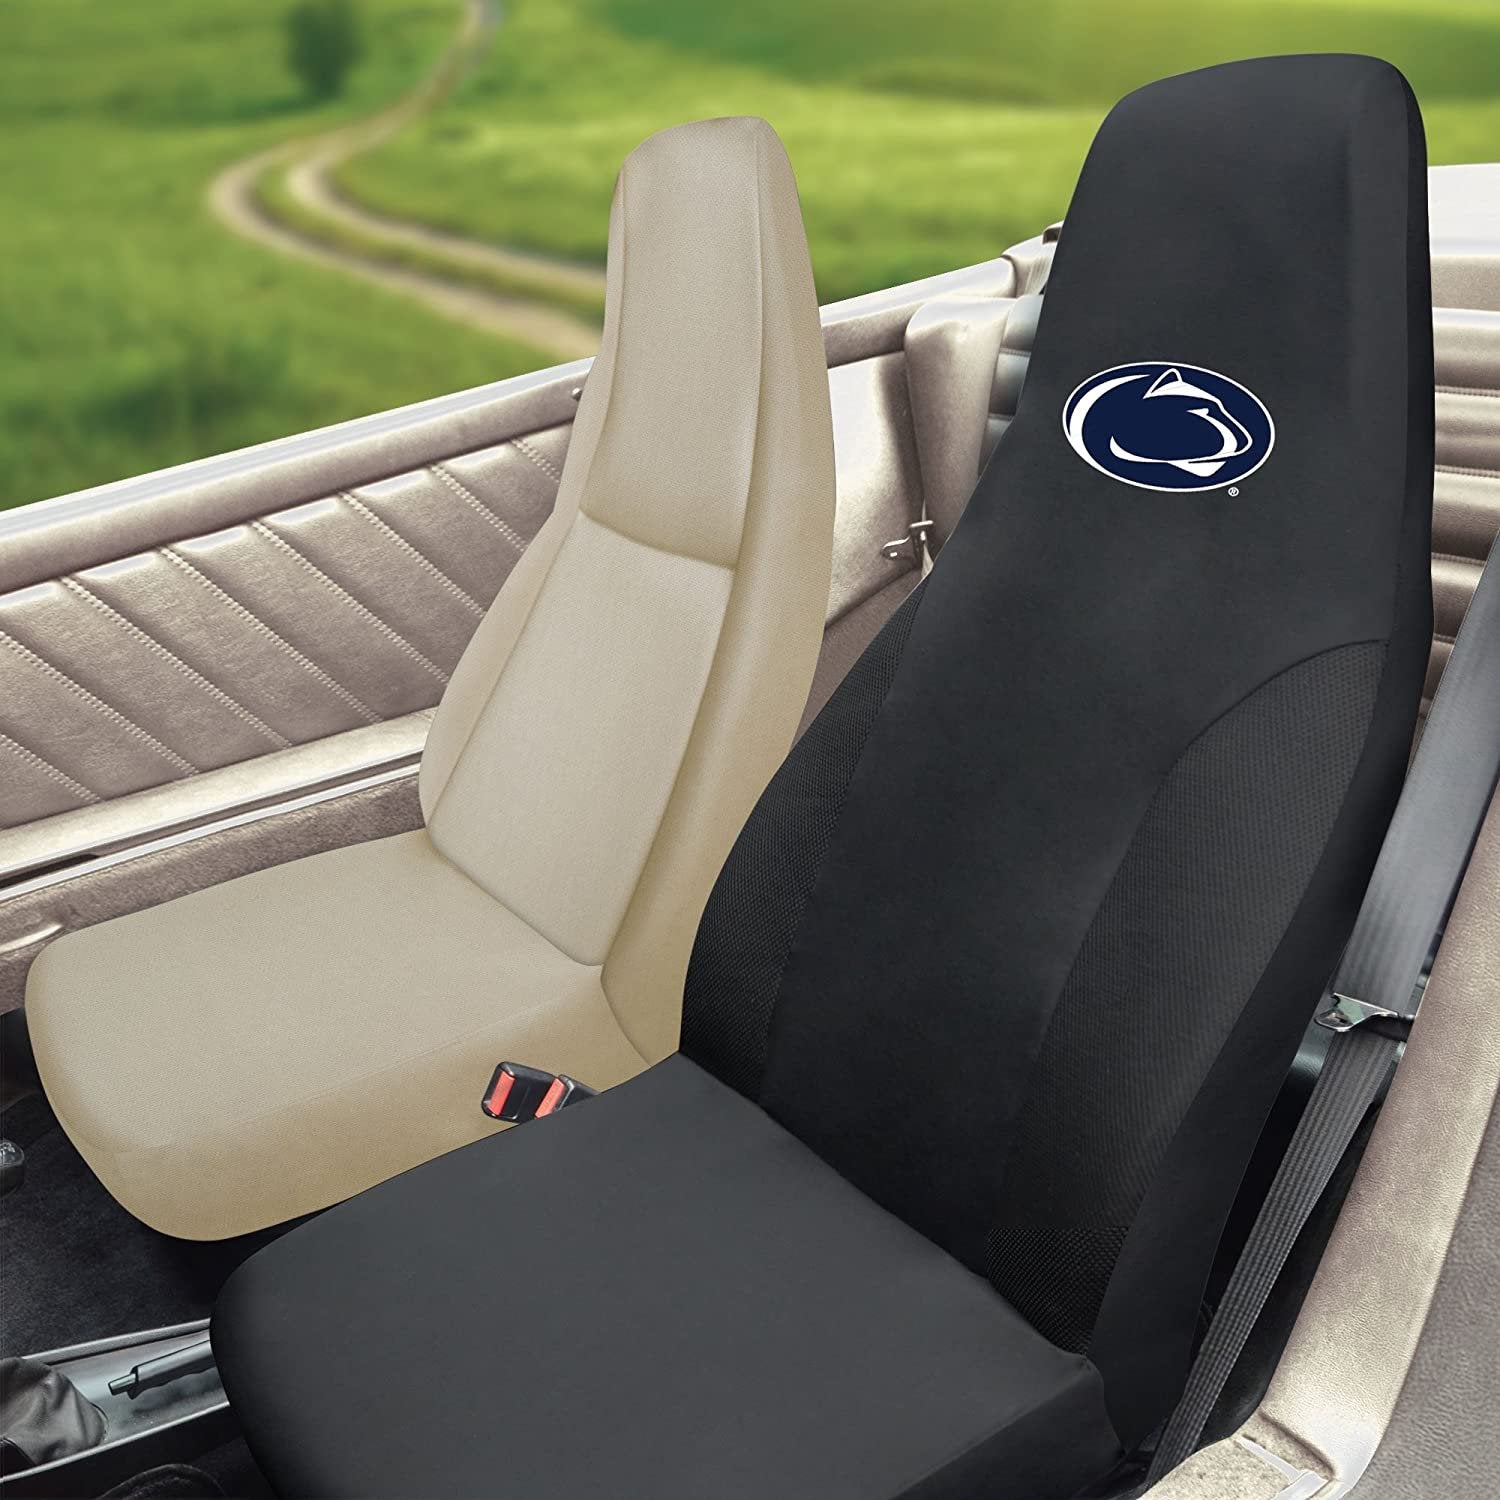 FANMATS - 15086 NCAA Penn State Nittany Lions Polyester Seat Cover